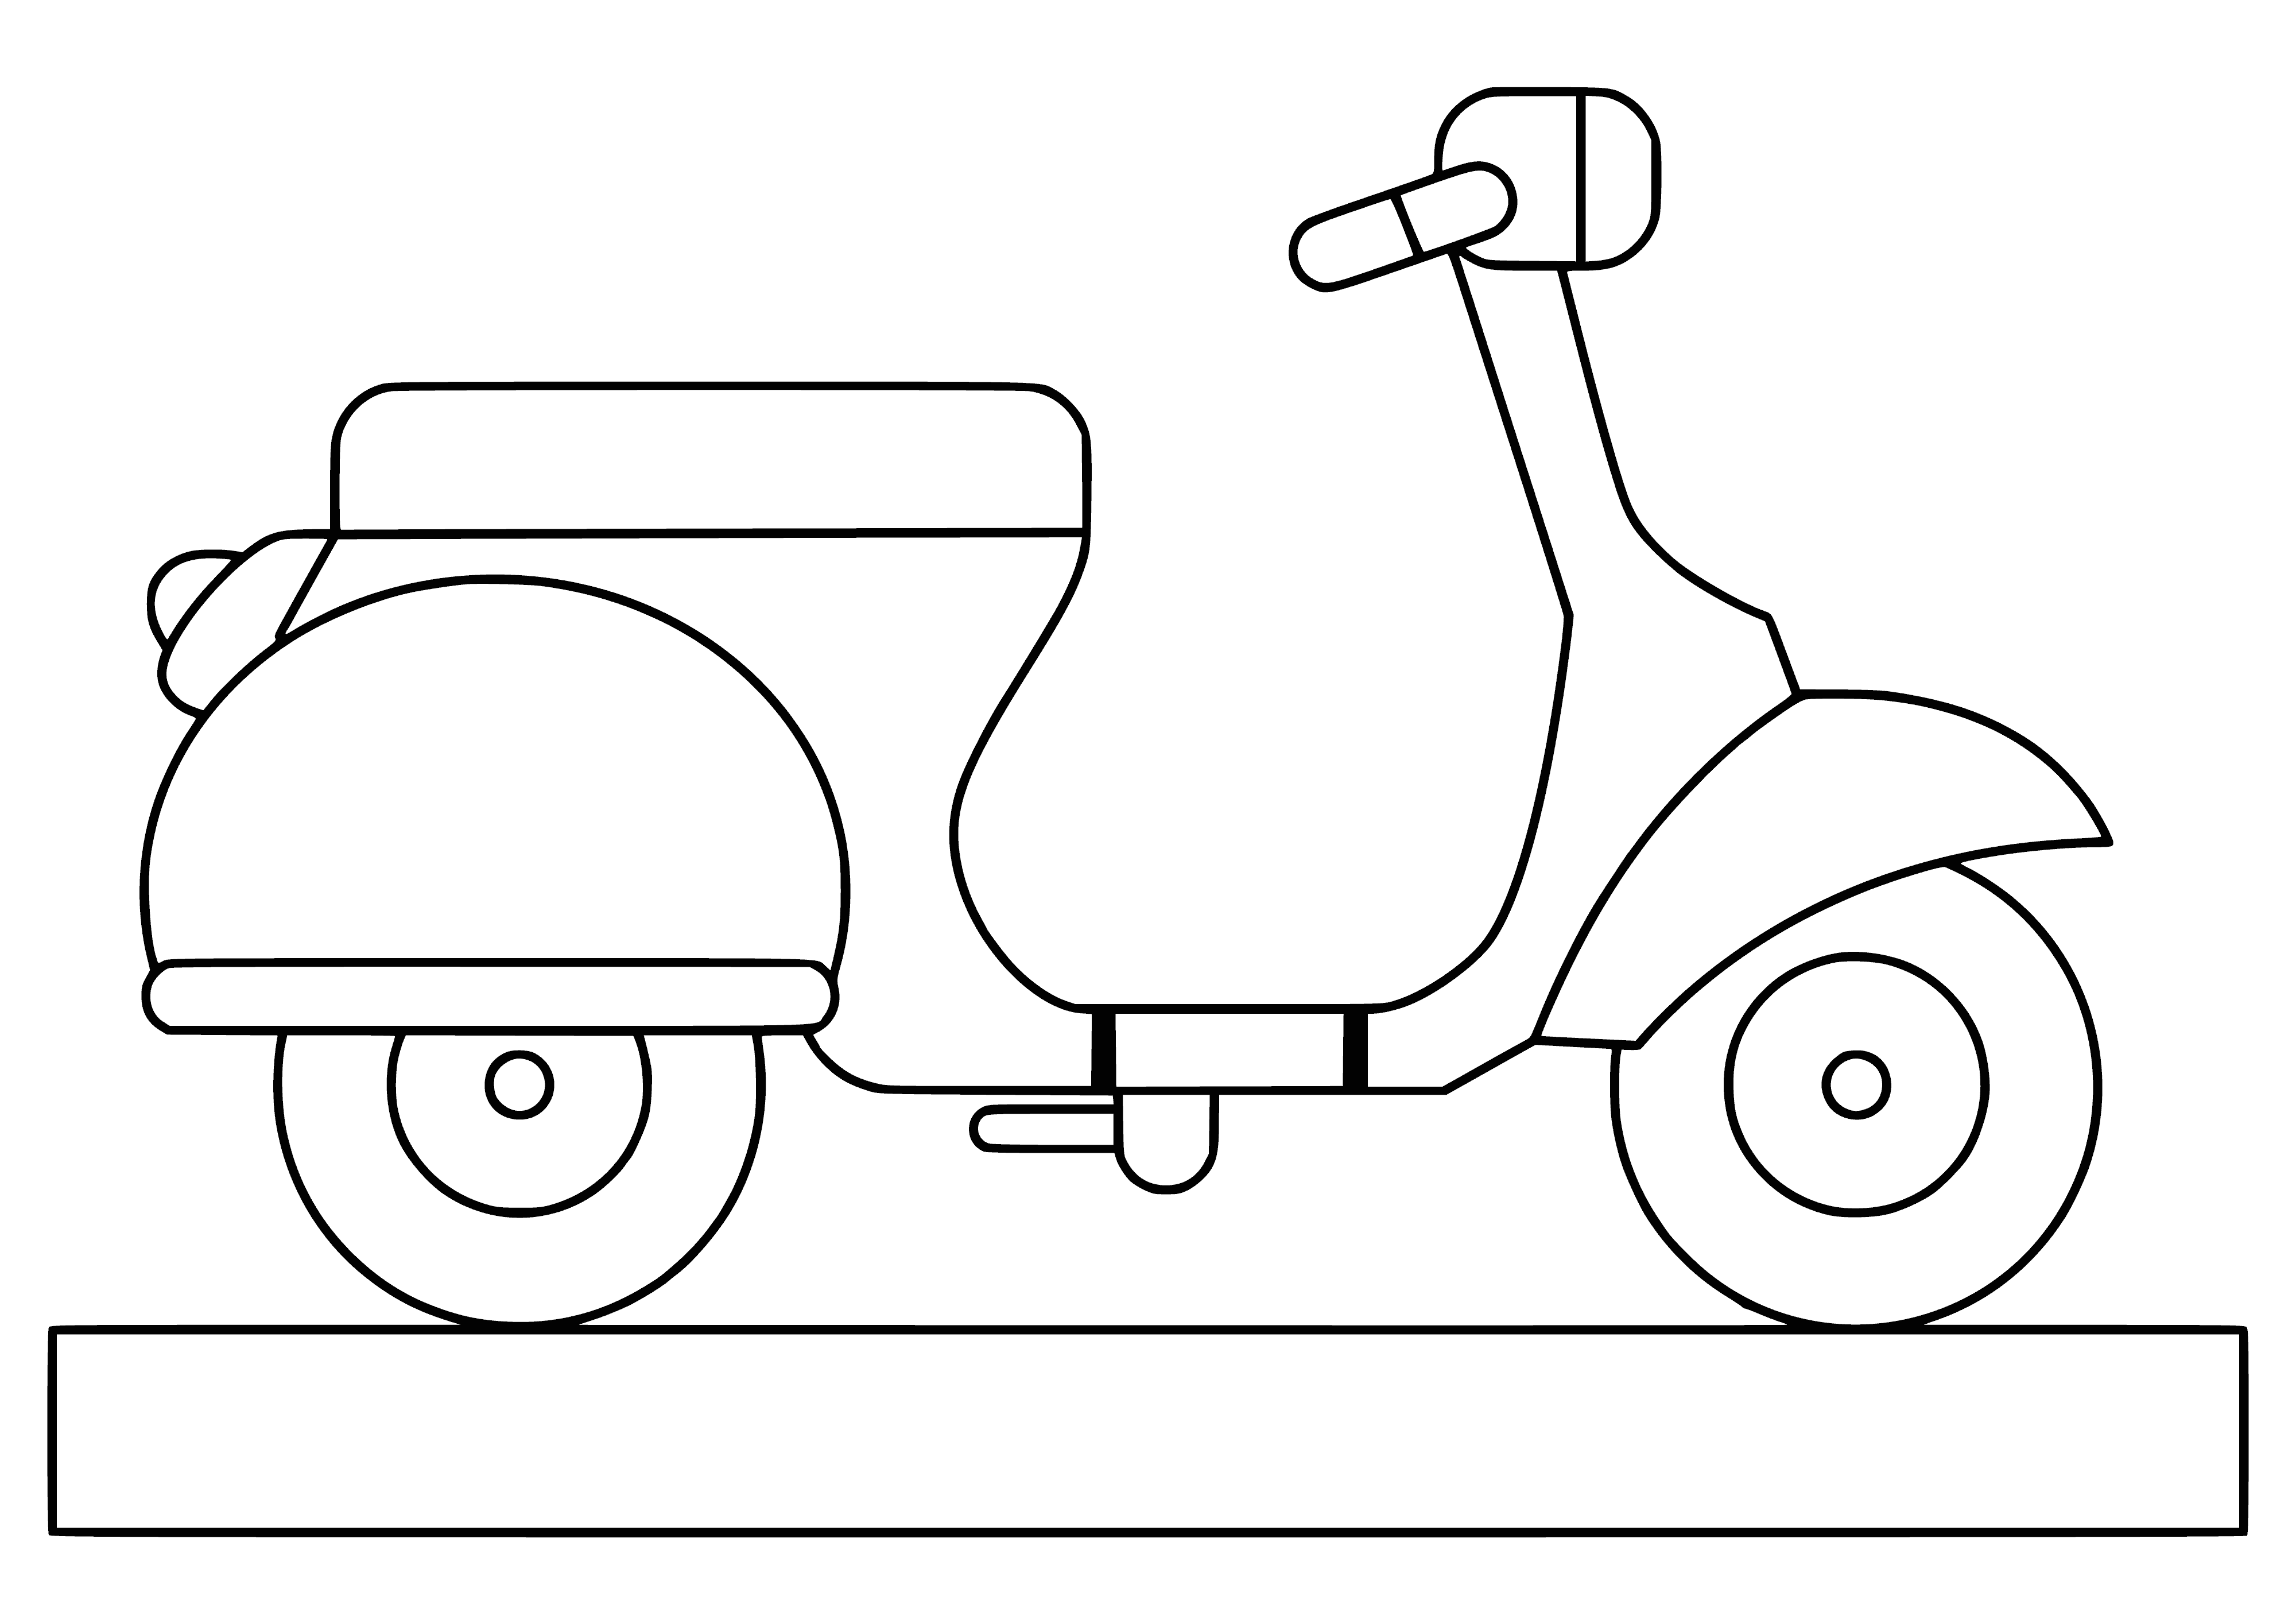 coloring page: Kids can color scooter page featuring big basket & handlebars & flowers.